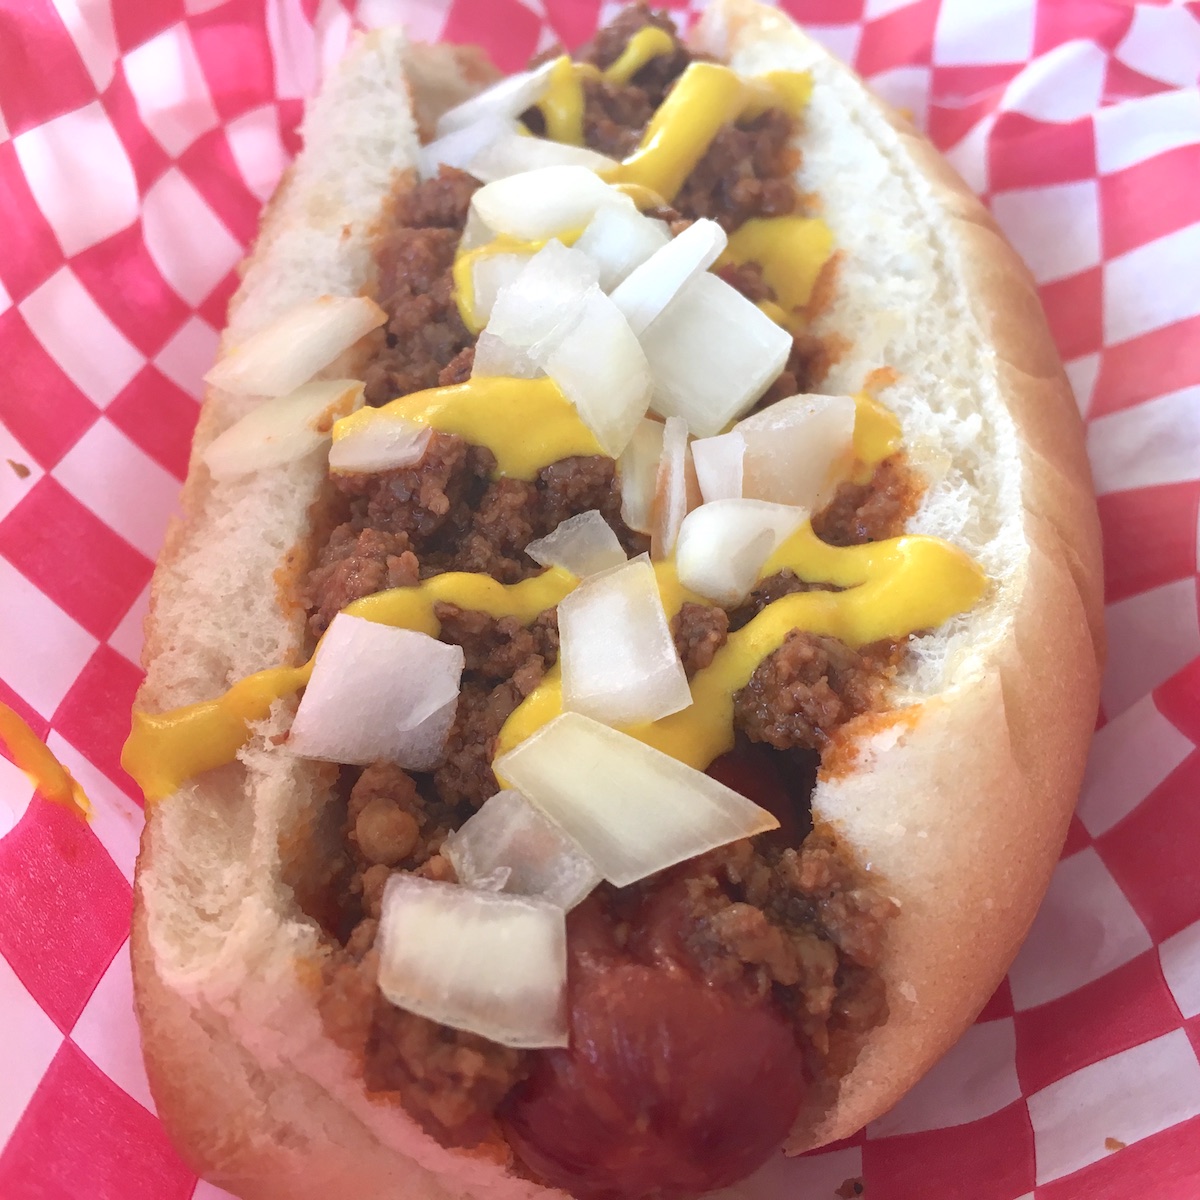 Chili Dog from Burger Inn in Melbourne, Florida